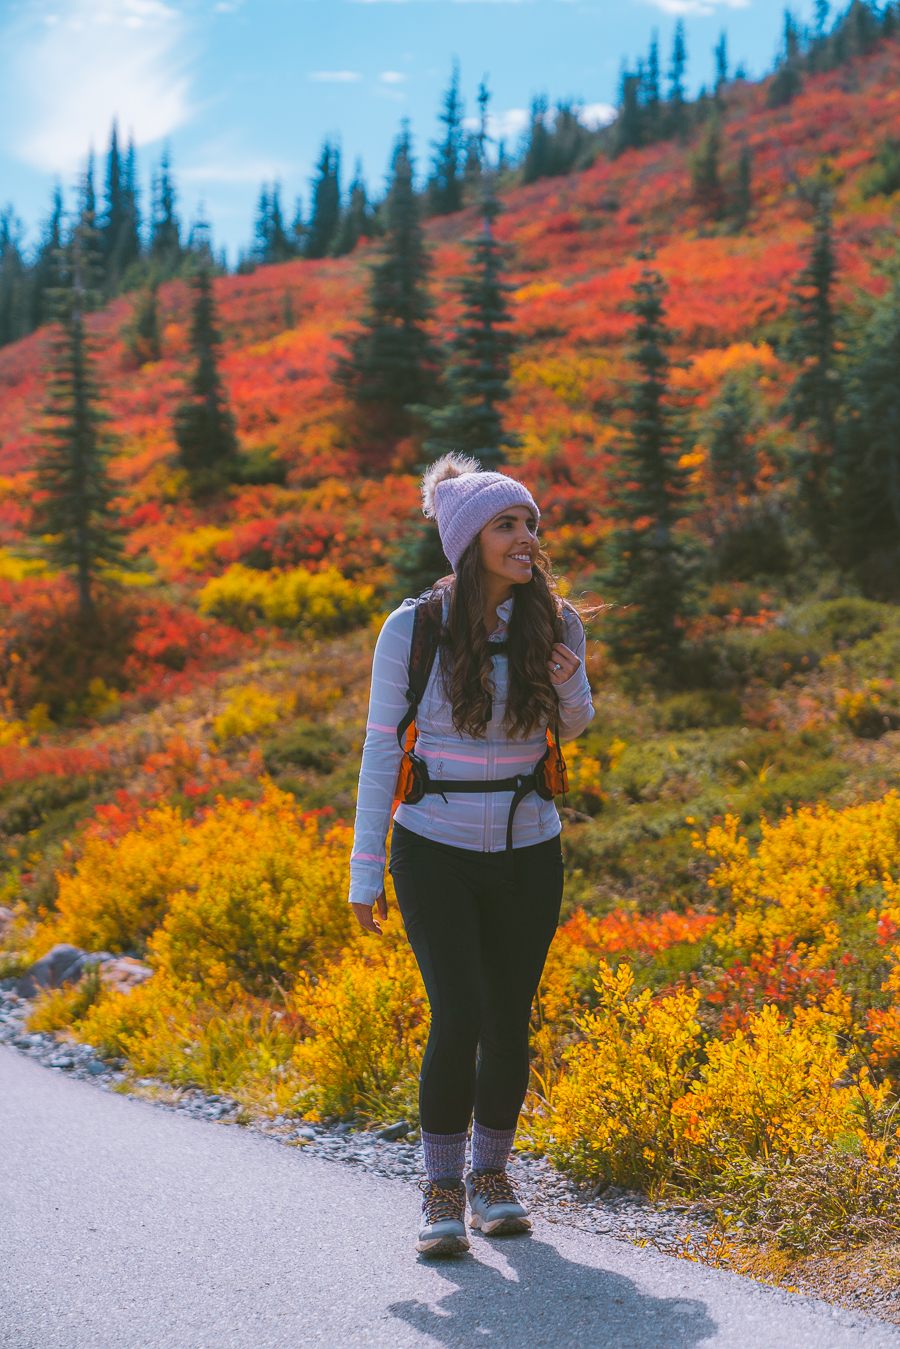 Best Fall Hikes In Washington State